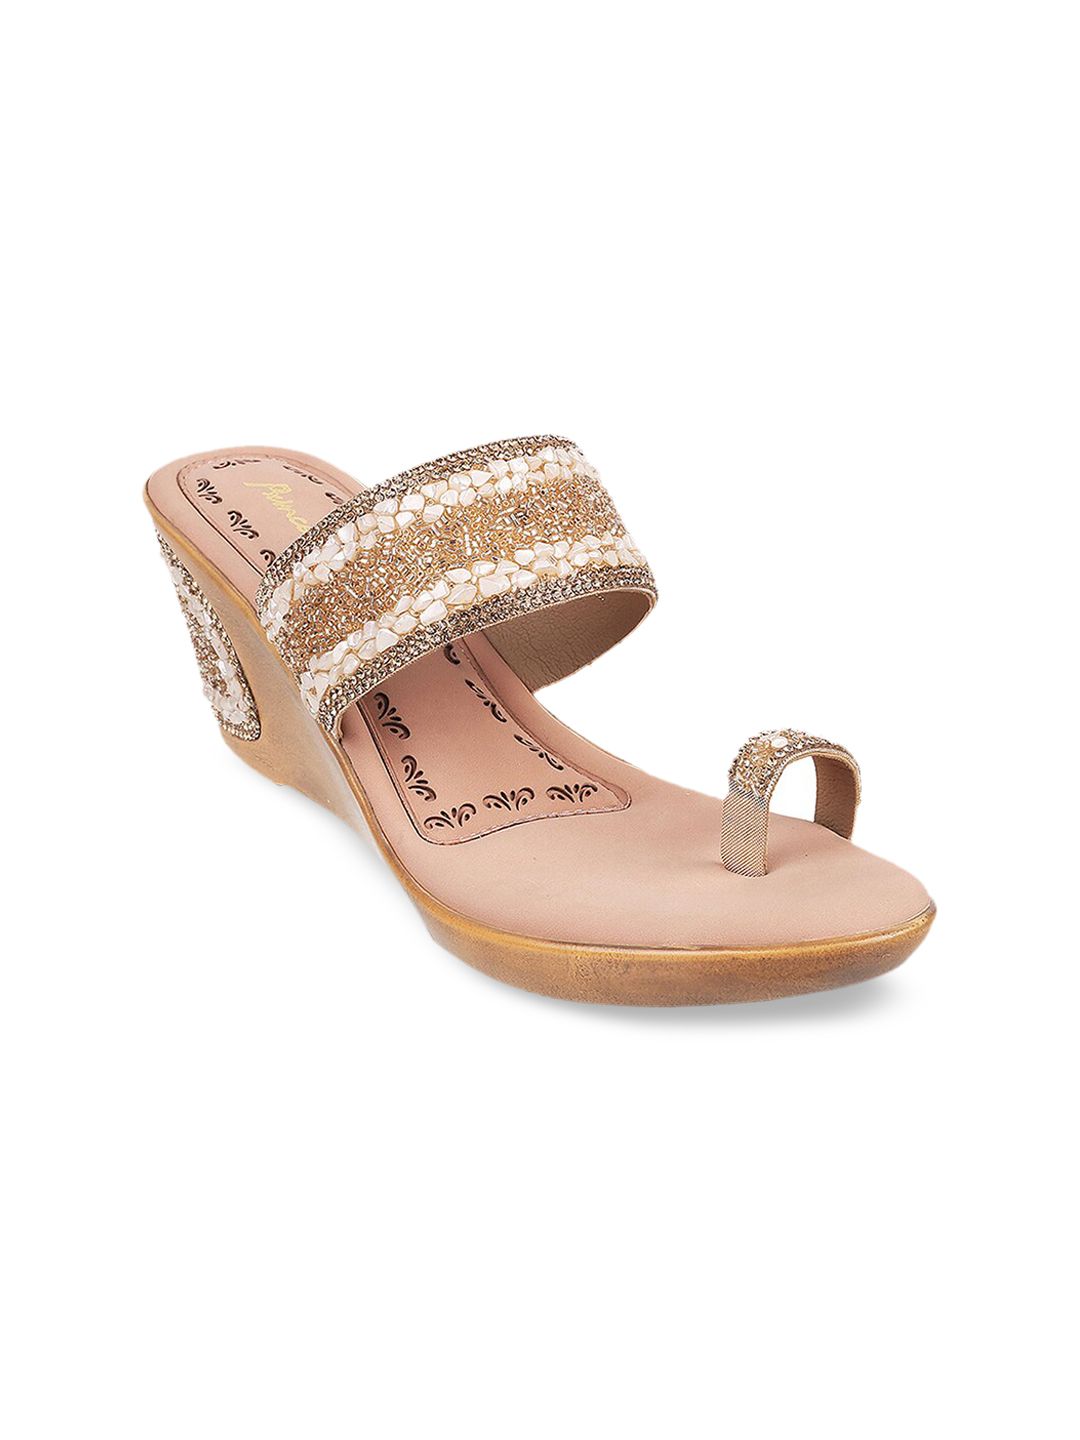 Metro Peach-Coloured Embellished Wedge Sandals Price in India